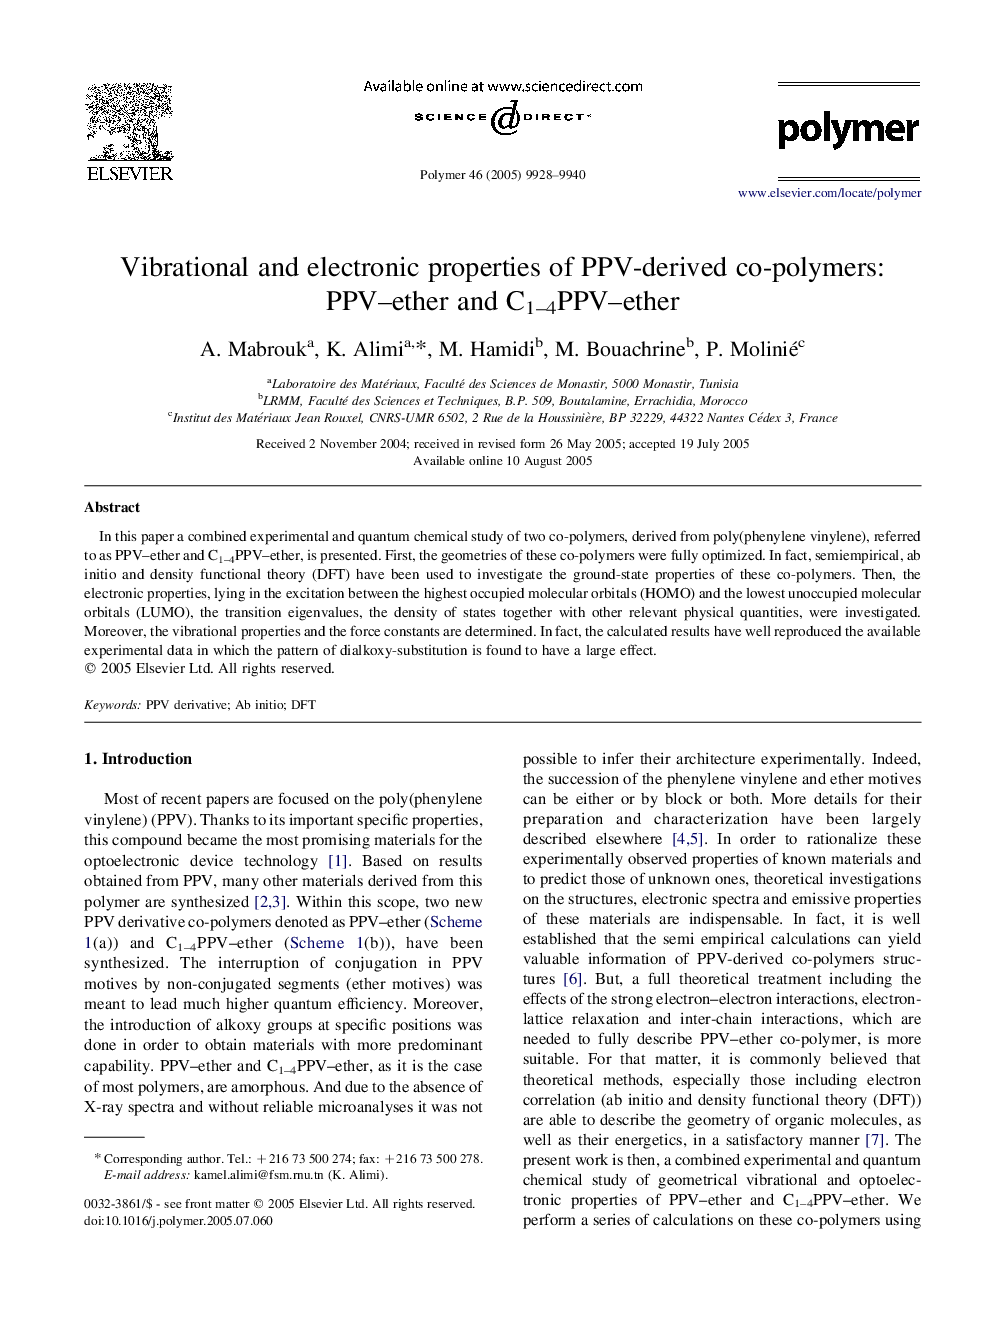 Vibrational and electronic properties of PPV-derived co-polymers: PPV-ether and C1-4PPV-ether